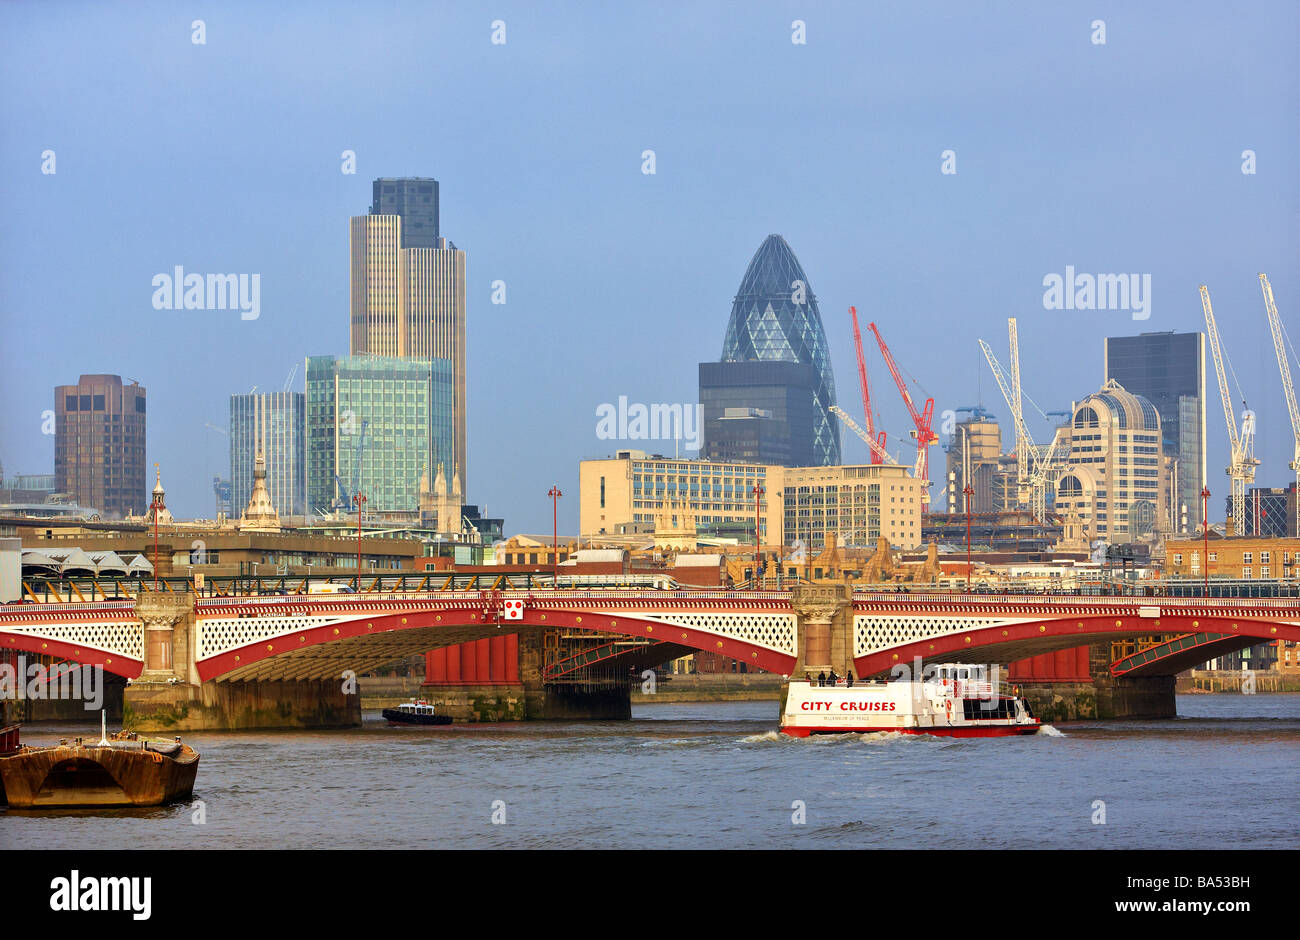 The city of London skyline with Blackfriars bridge in the forground and 30 St Mary Axe building (Gherkin) in the background. Stock Photo